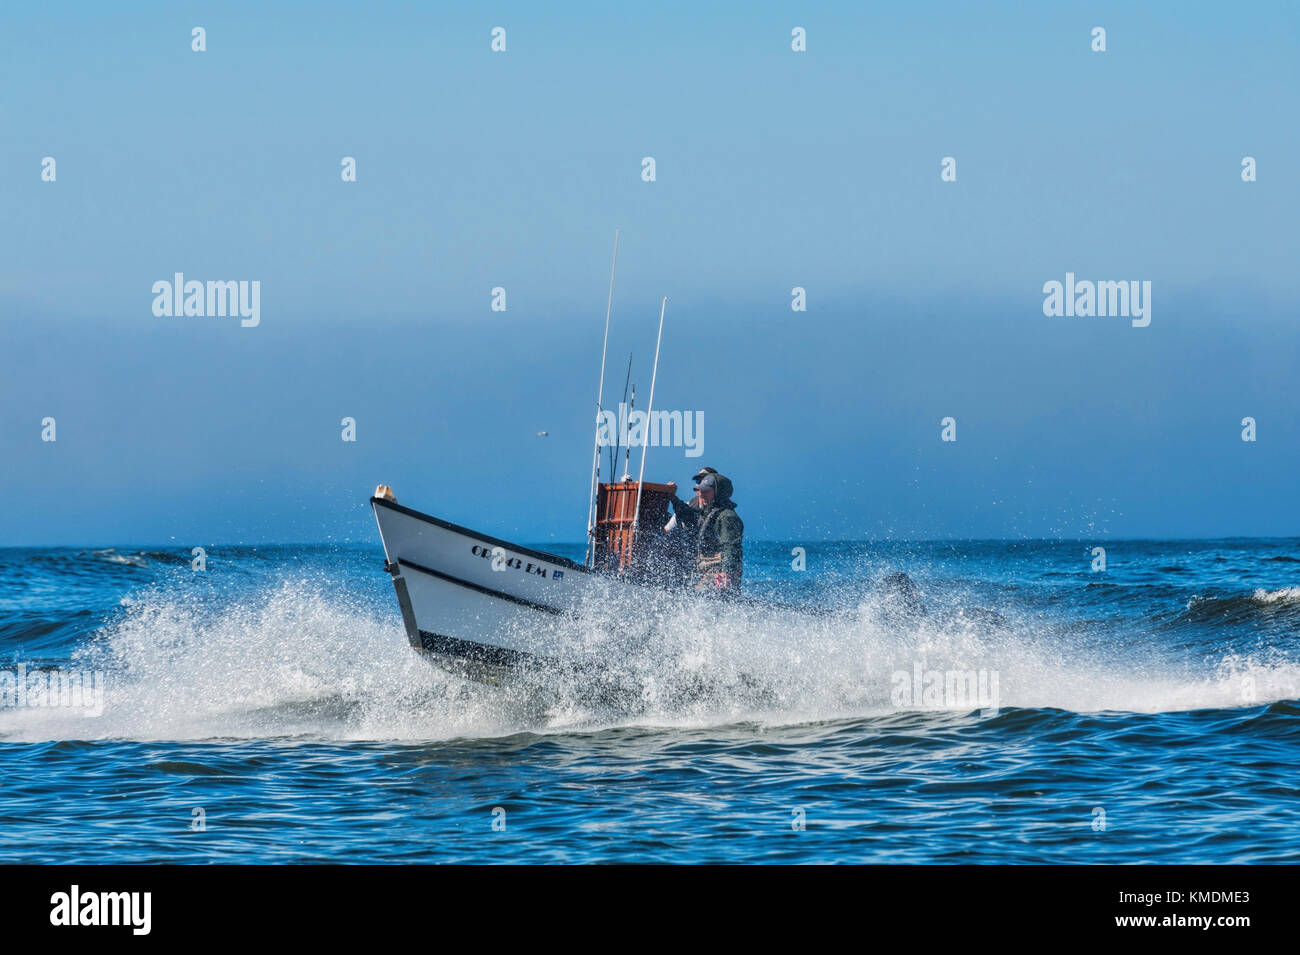 Pacific City, Oregon, USA - July 2, 2015: A dory boat passes through the surf as it's captain makes his approach to landing on the beach in Pacific Ci Stock Photo